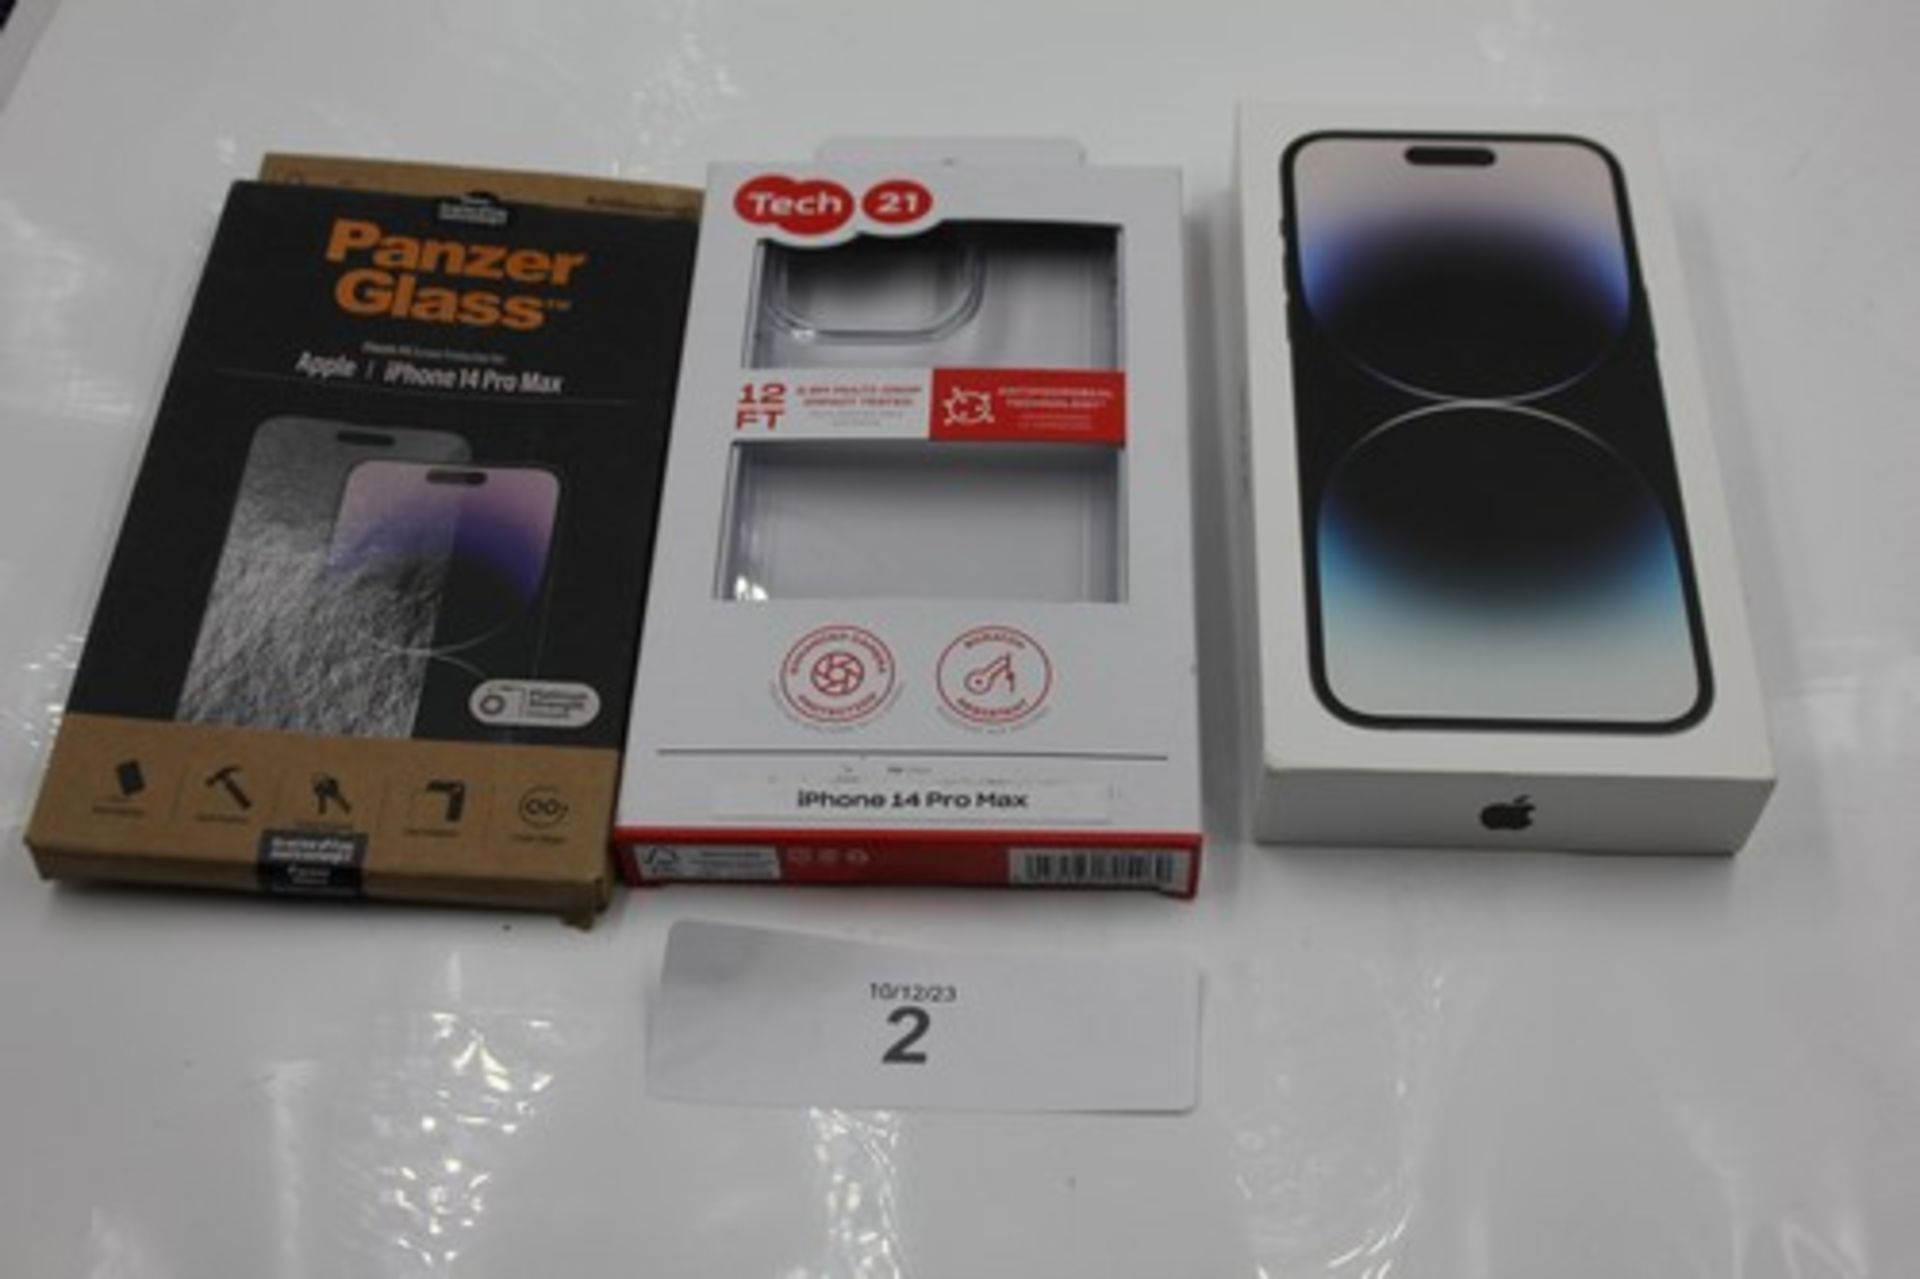 1 x Apple iPhone 14 Pro Max, space black, 256GB, model: A2894, IMEI No: 355281438908045, together